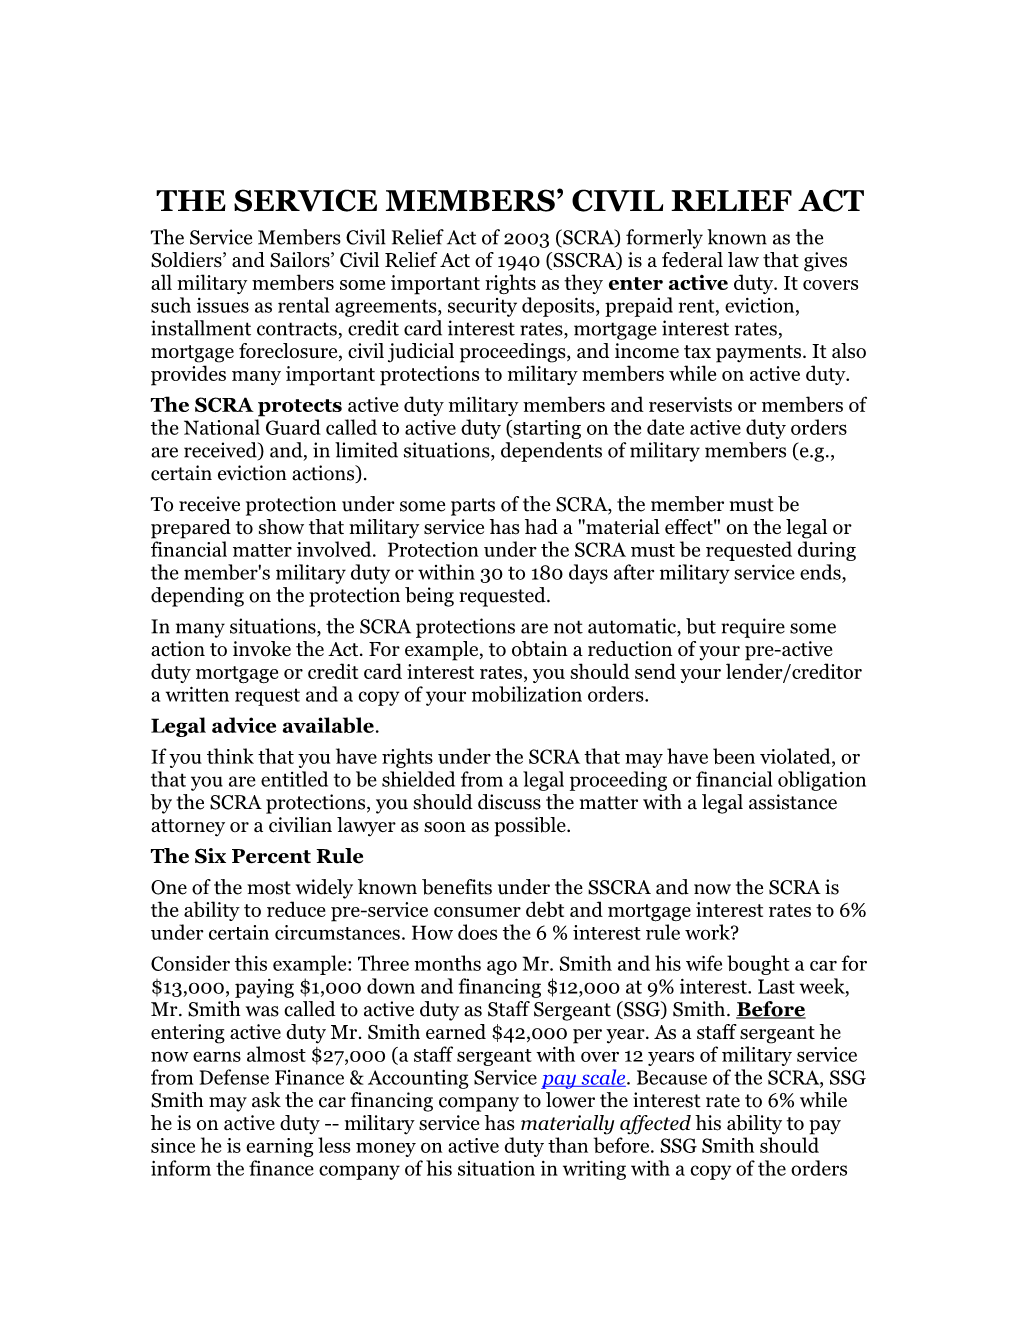 The Service Members’ Civil Relief Act